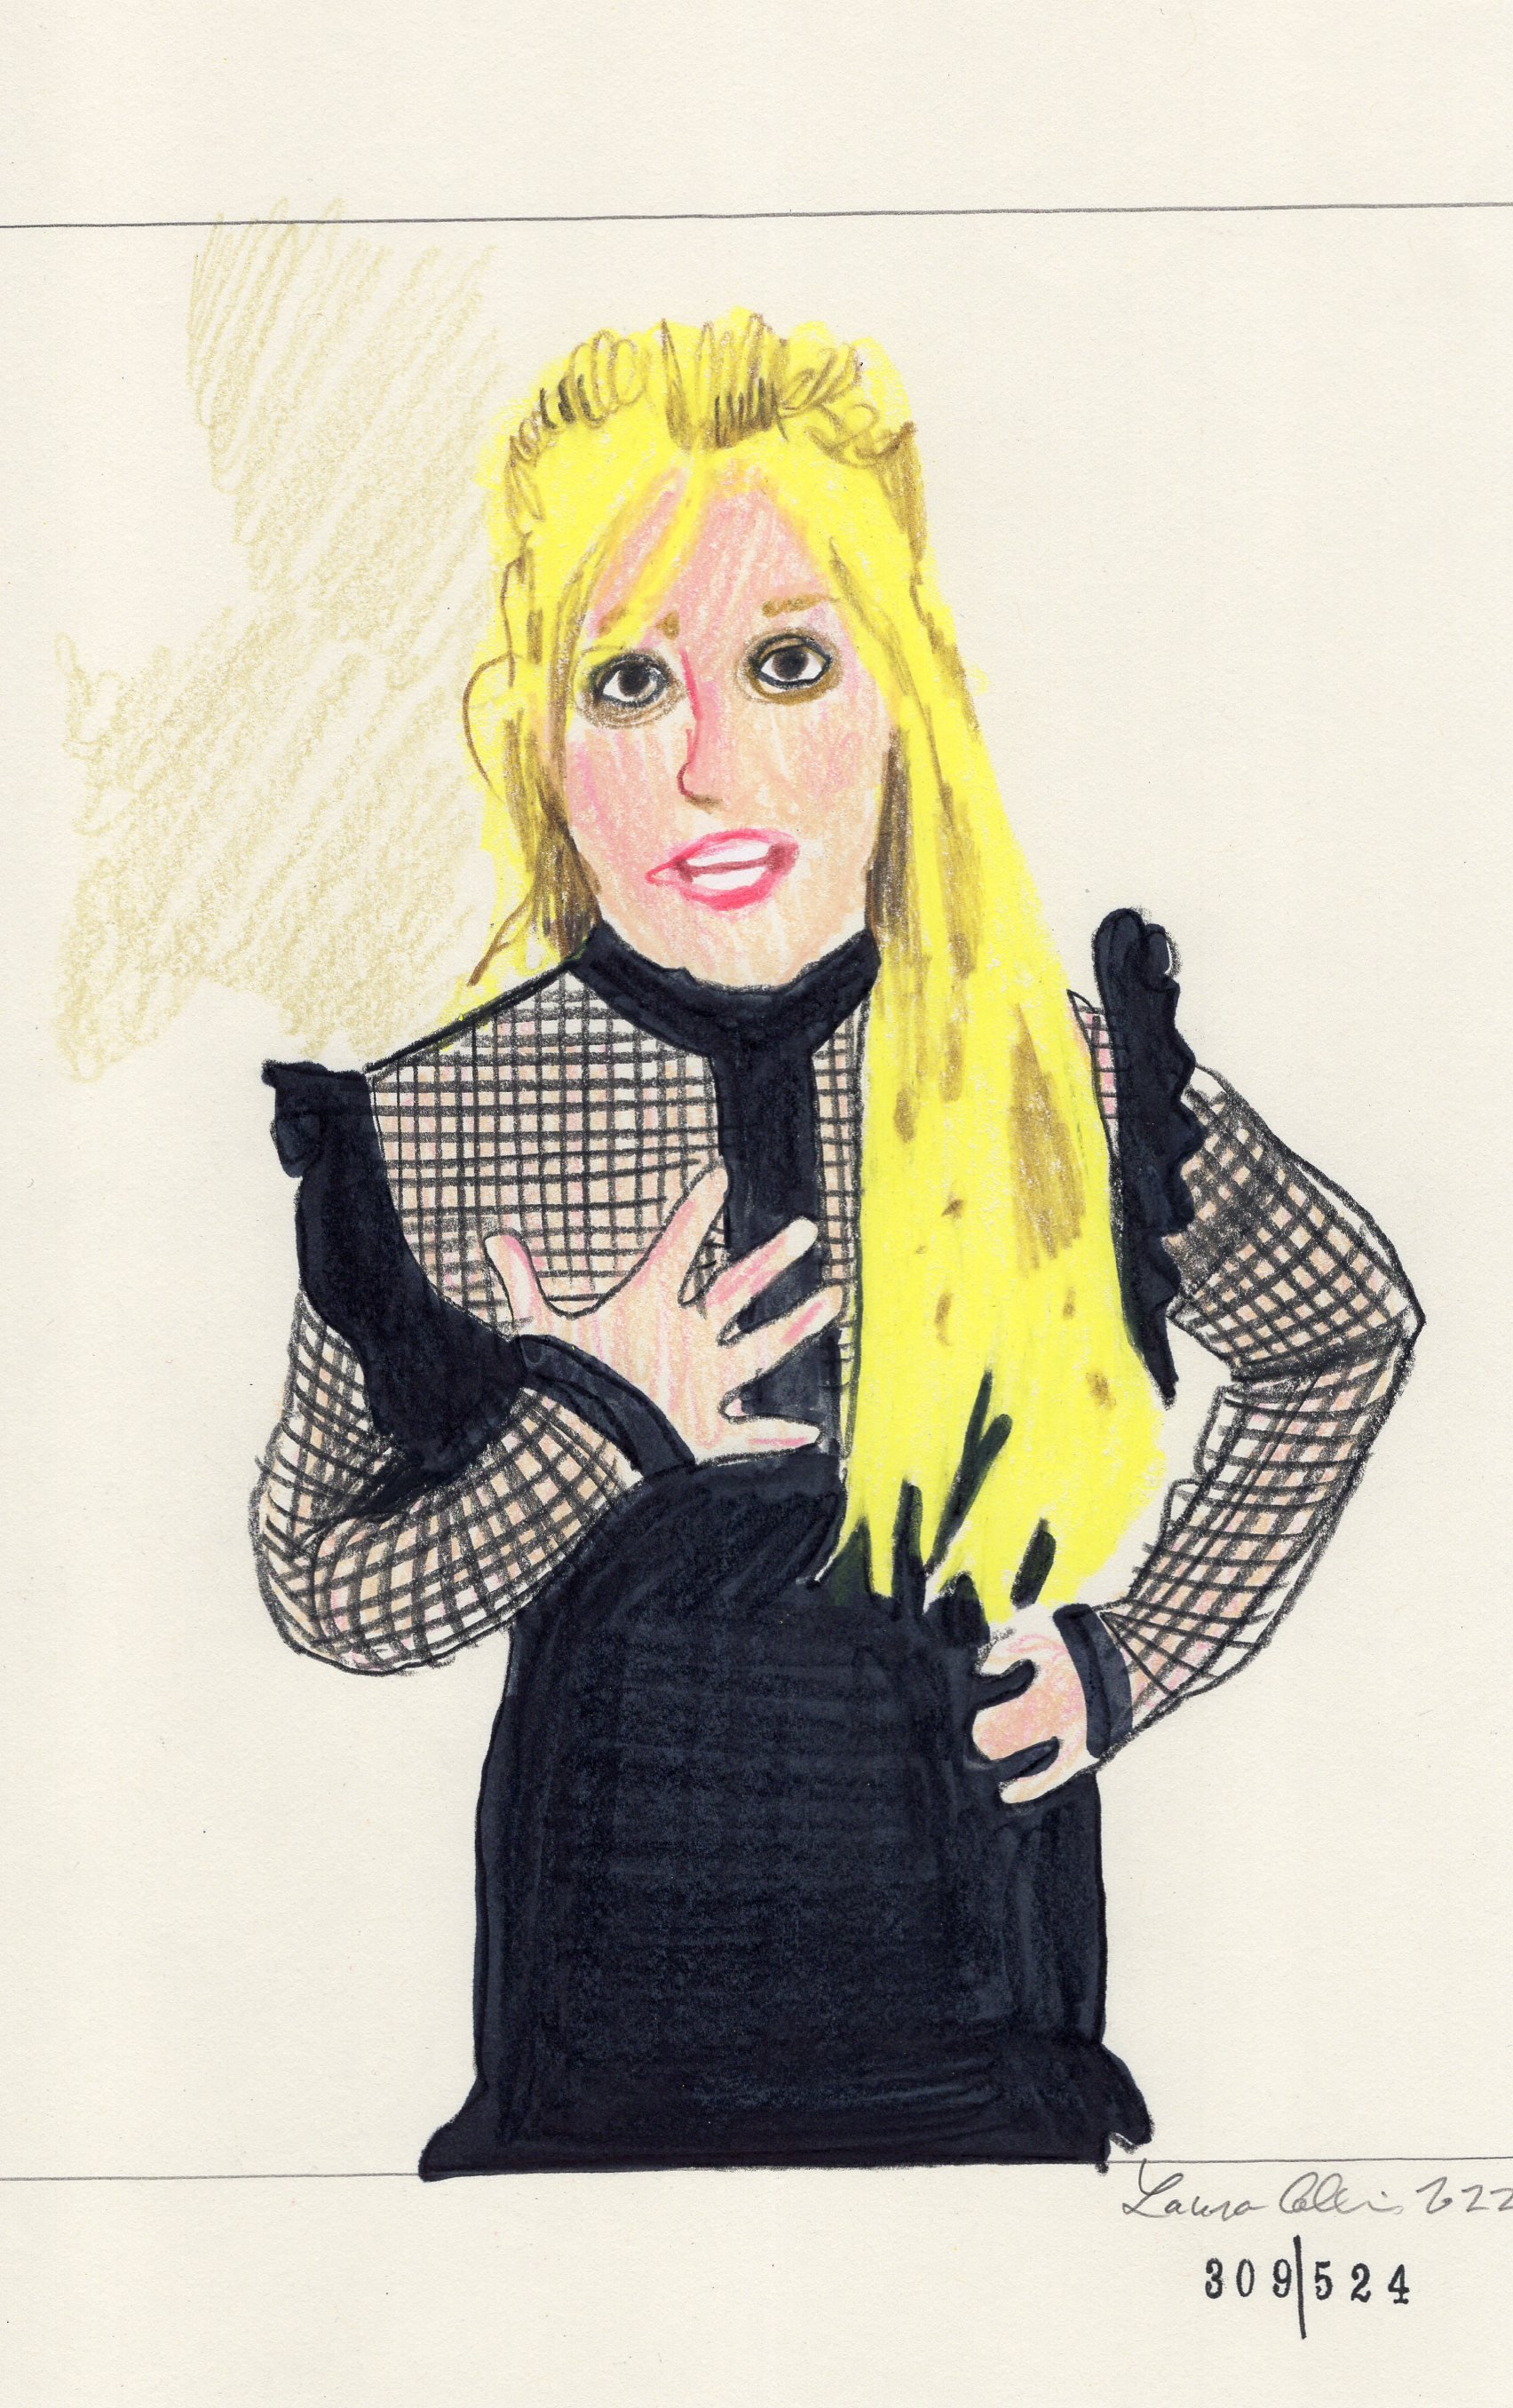 Laura Collins Britney Spears Animation 6x9in mixed media 2022 no309.jpg